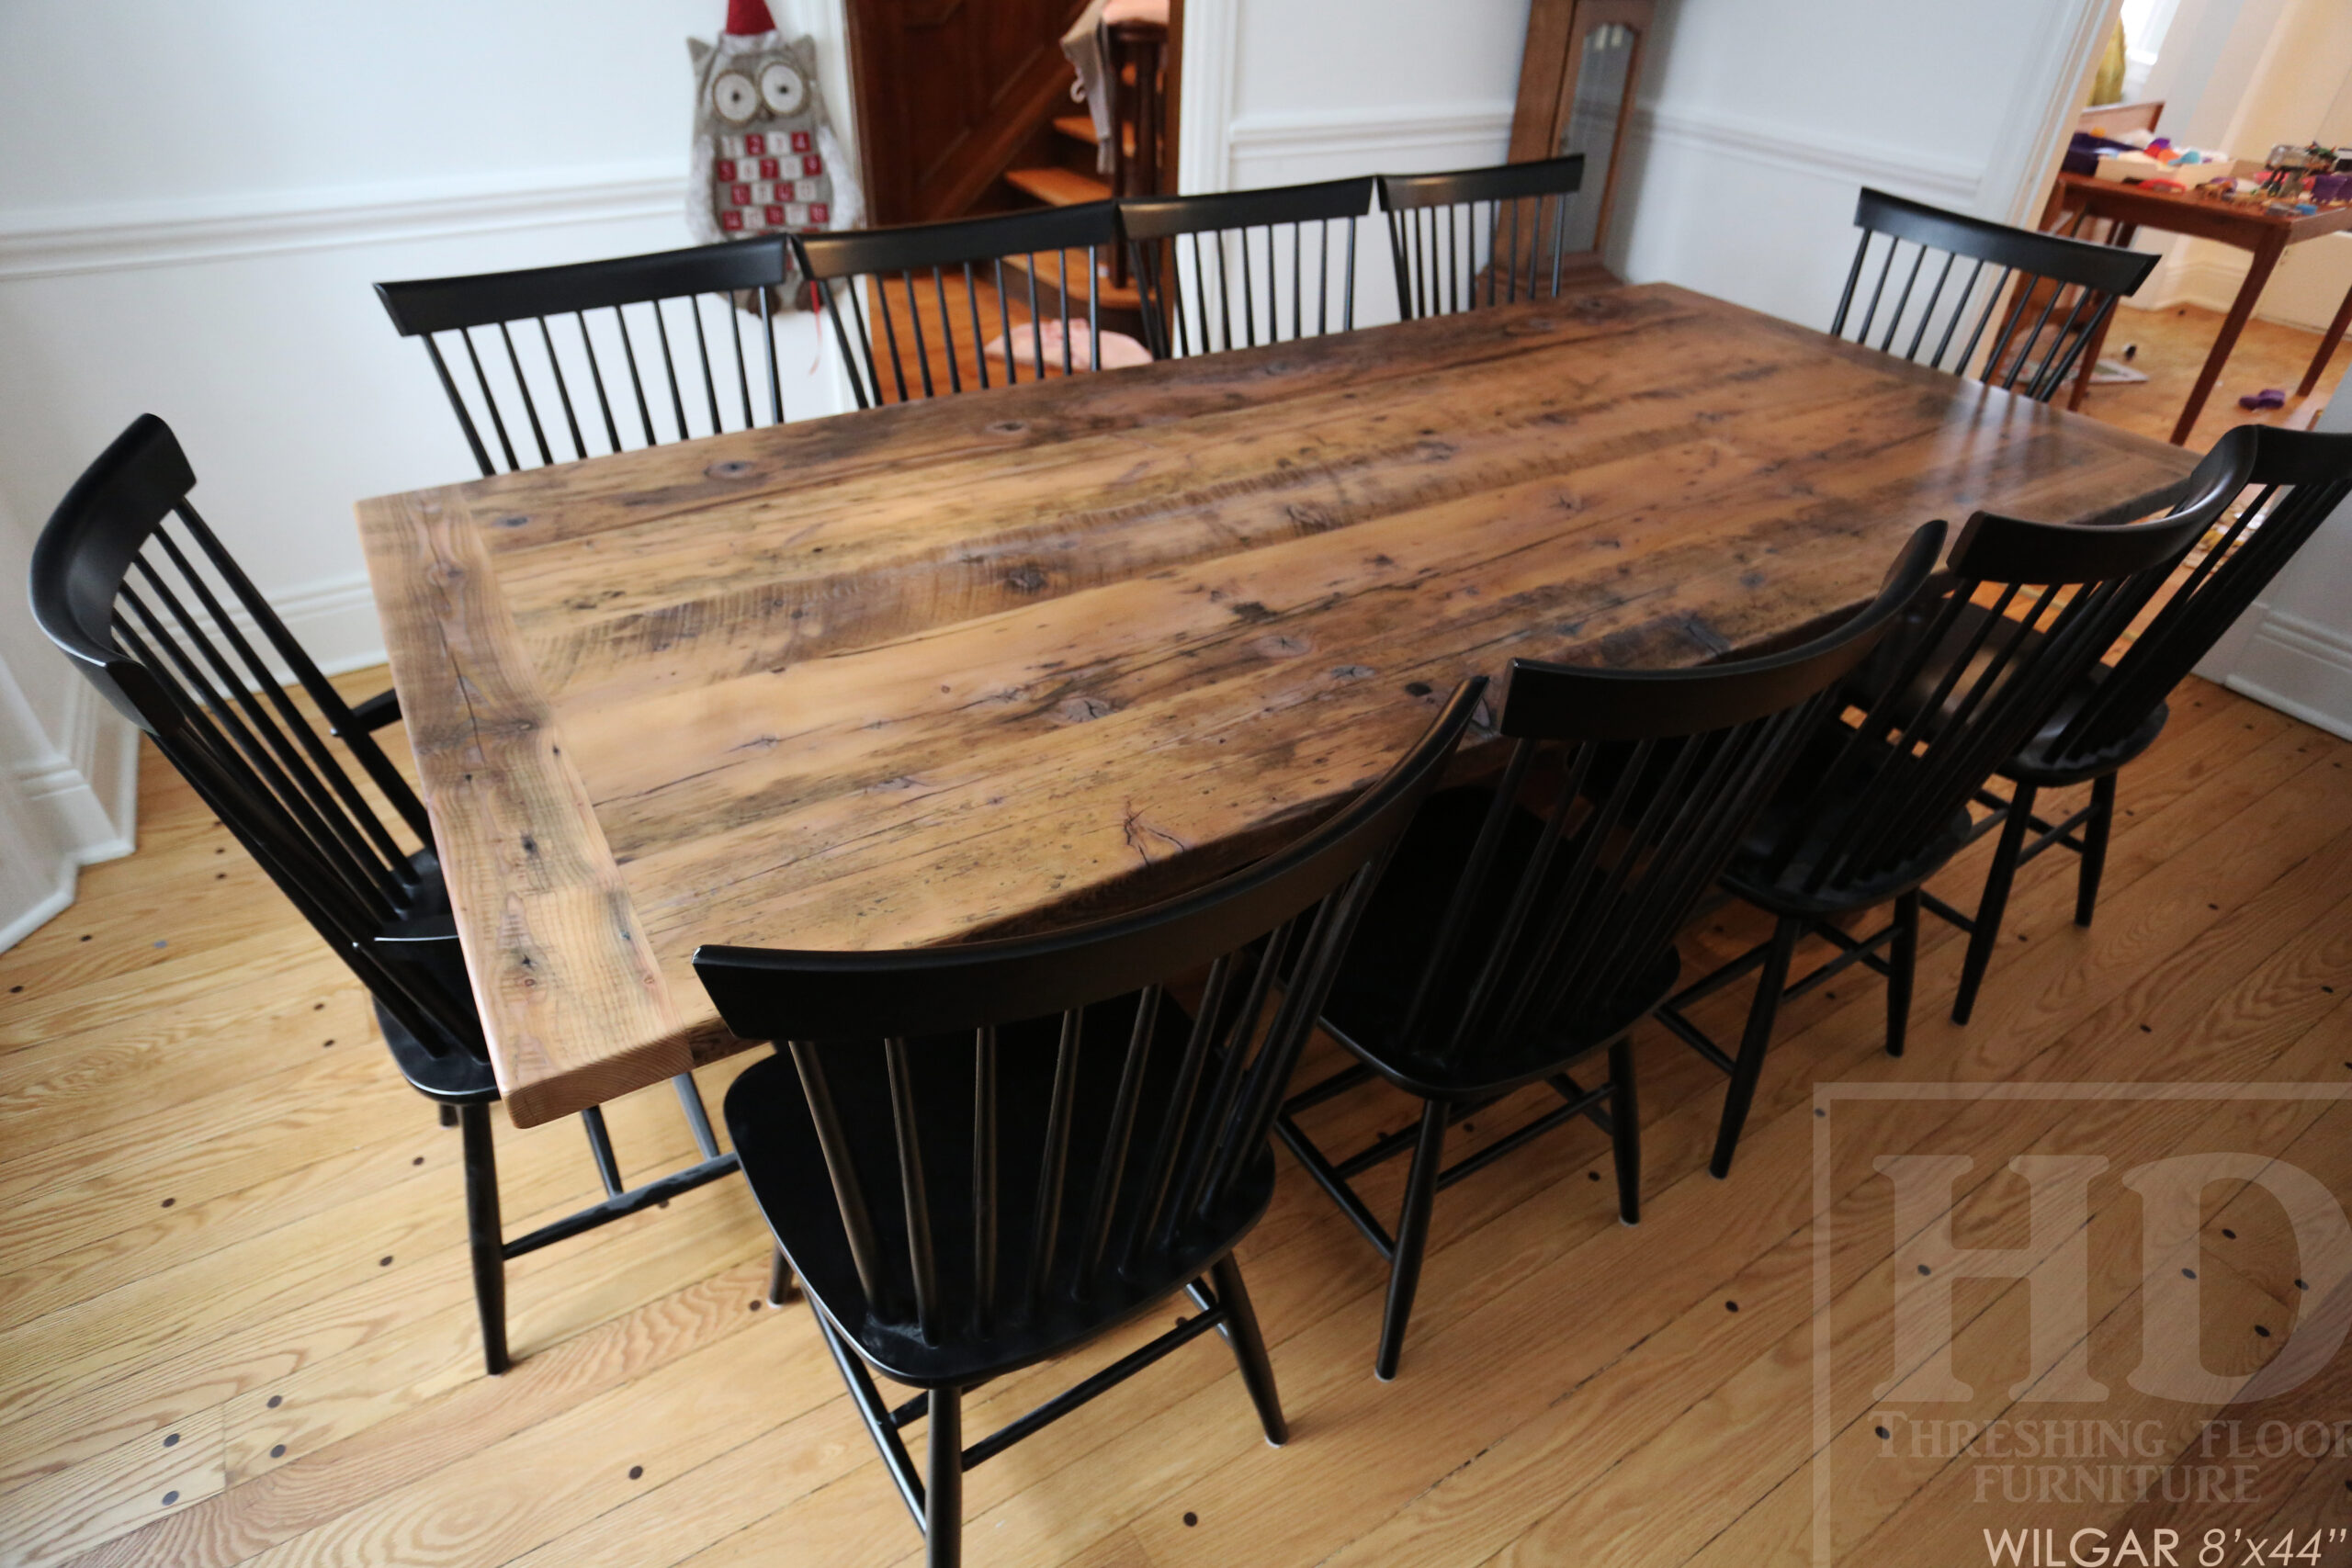 8’ Ontario Barnwood Table we made for an Etobicoke, Ontario home – 44” wide – Sawbuck Base – Hemlock Threshing Floor Construction – Original edges & distressing maintained – Premium epoxy + matte polyurethane finish – 10 Shaker Chairs / Wormy Maple / Painted Black / Polyurethane clearcoat finish – www.table.ca